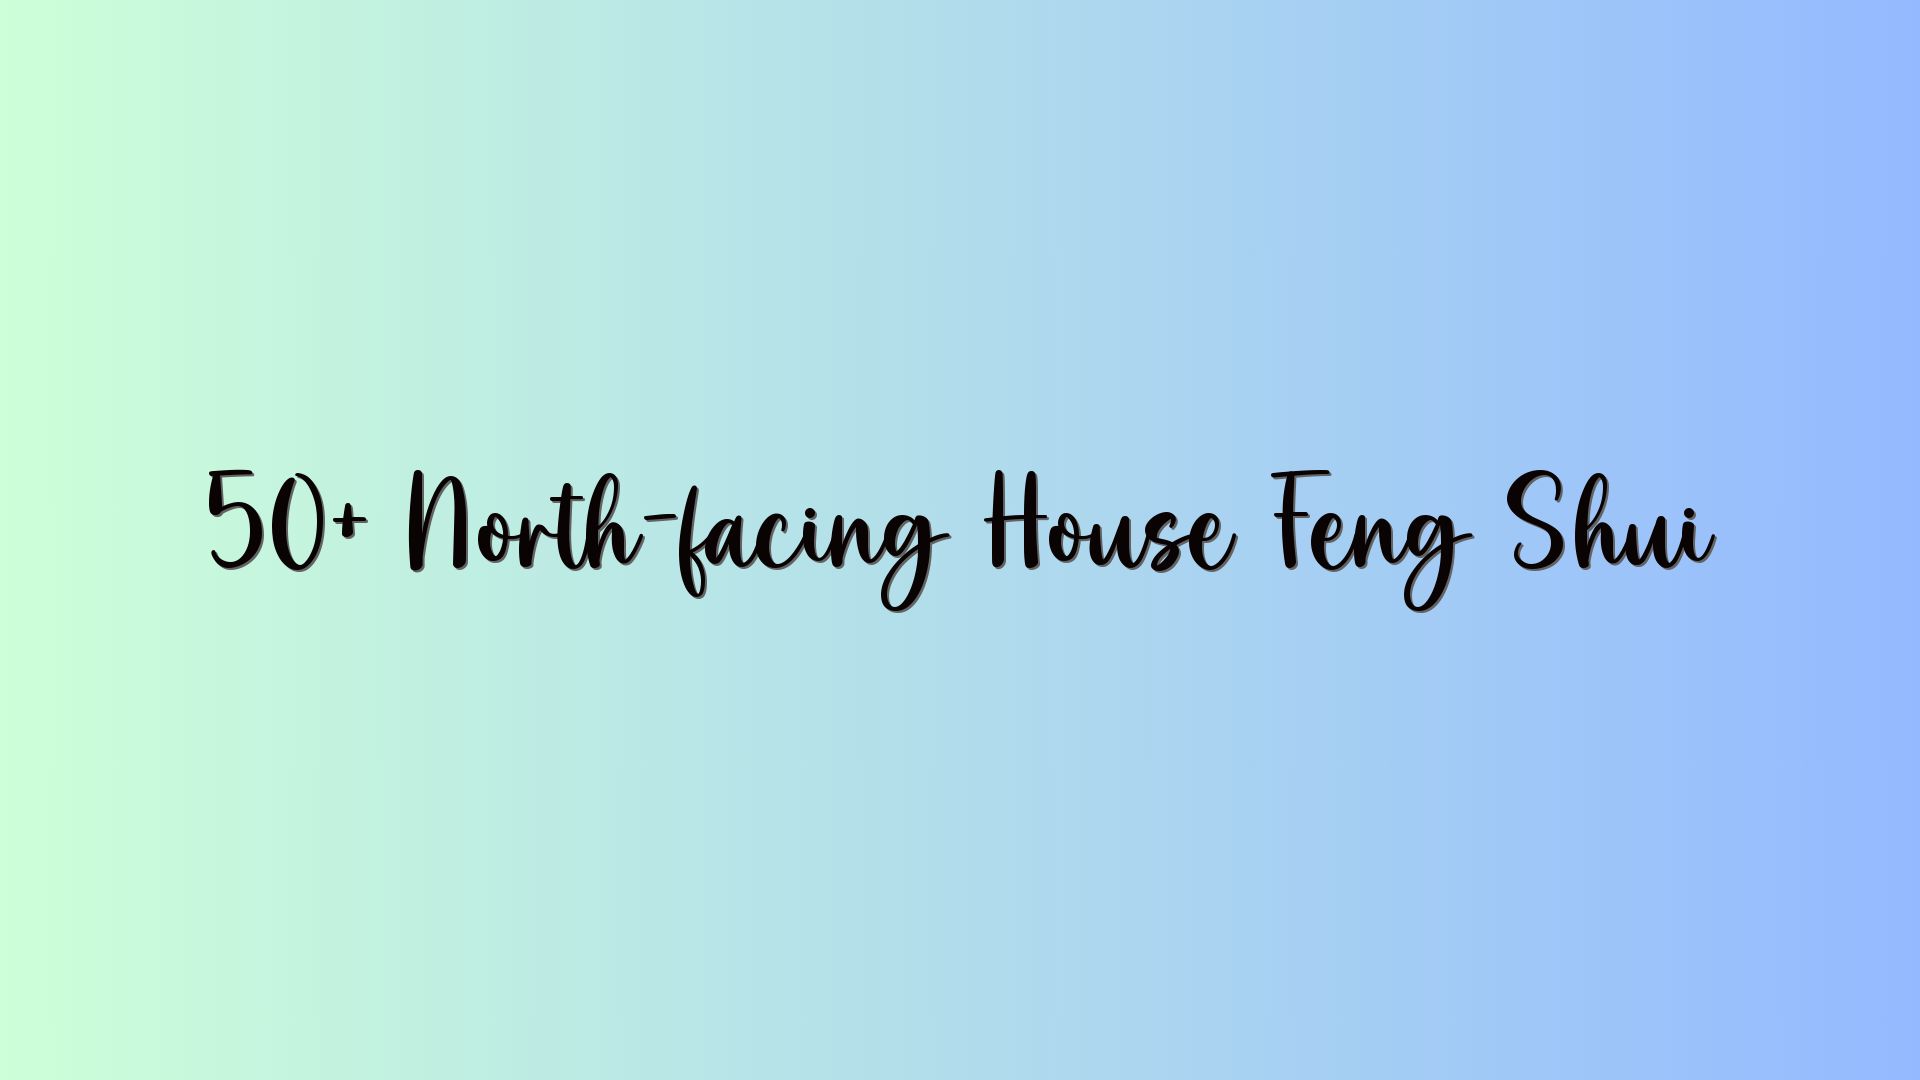 50+ North-facing House Feng Shui